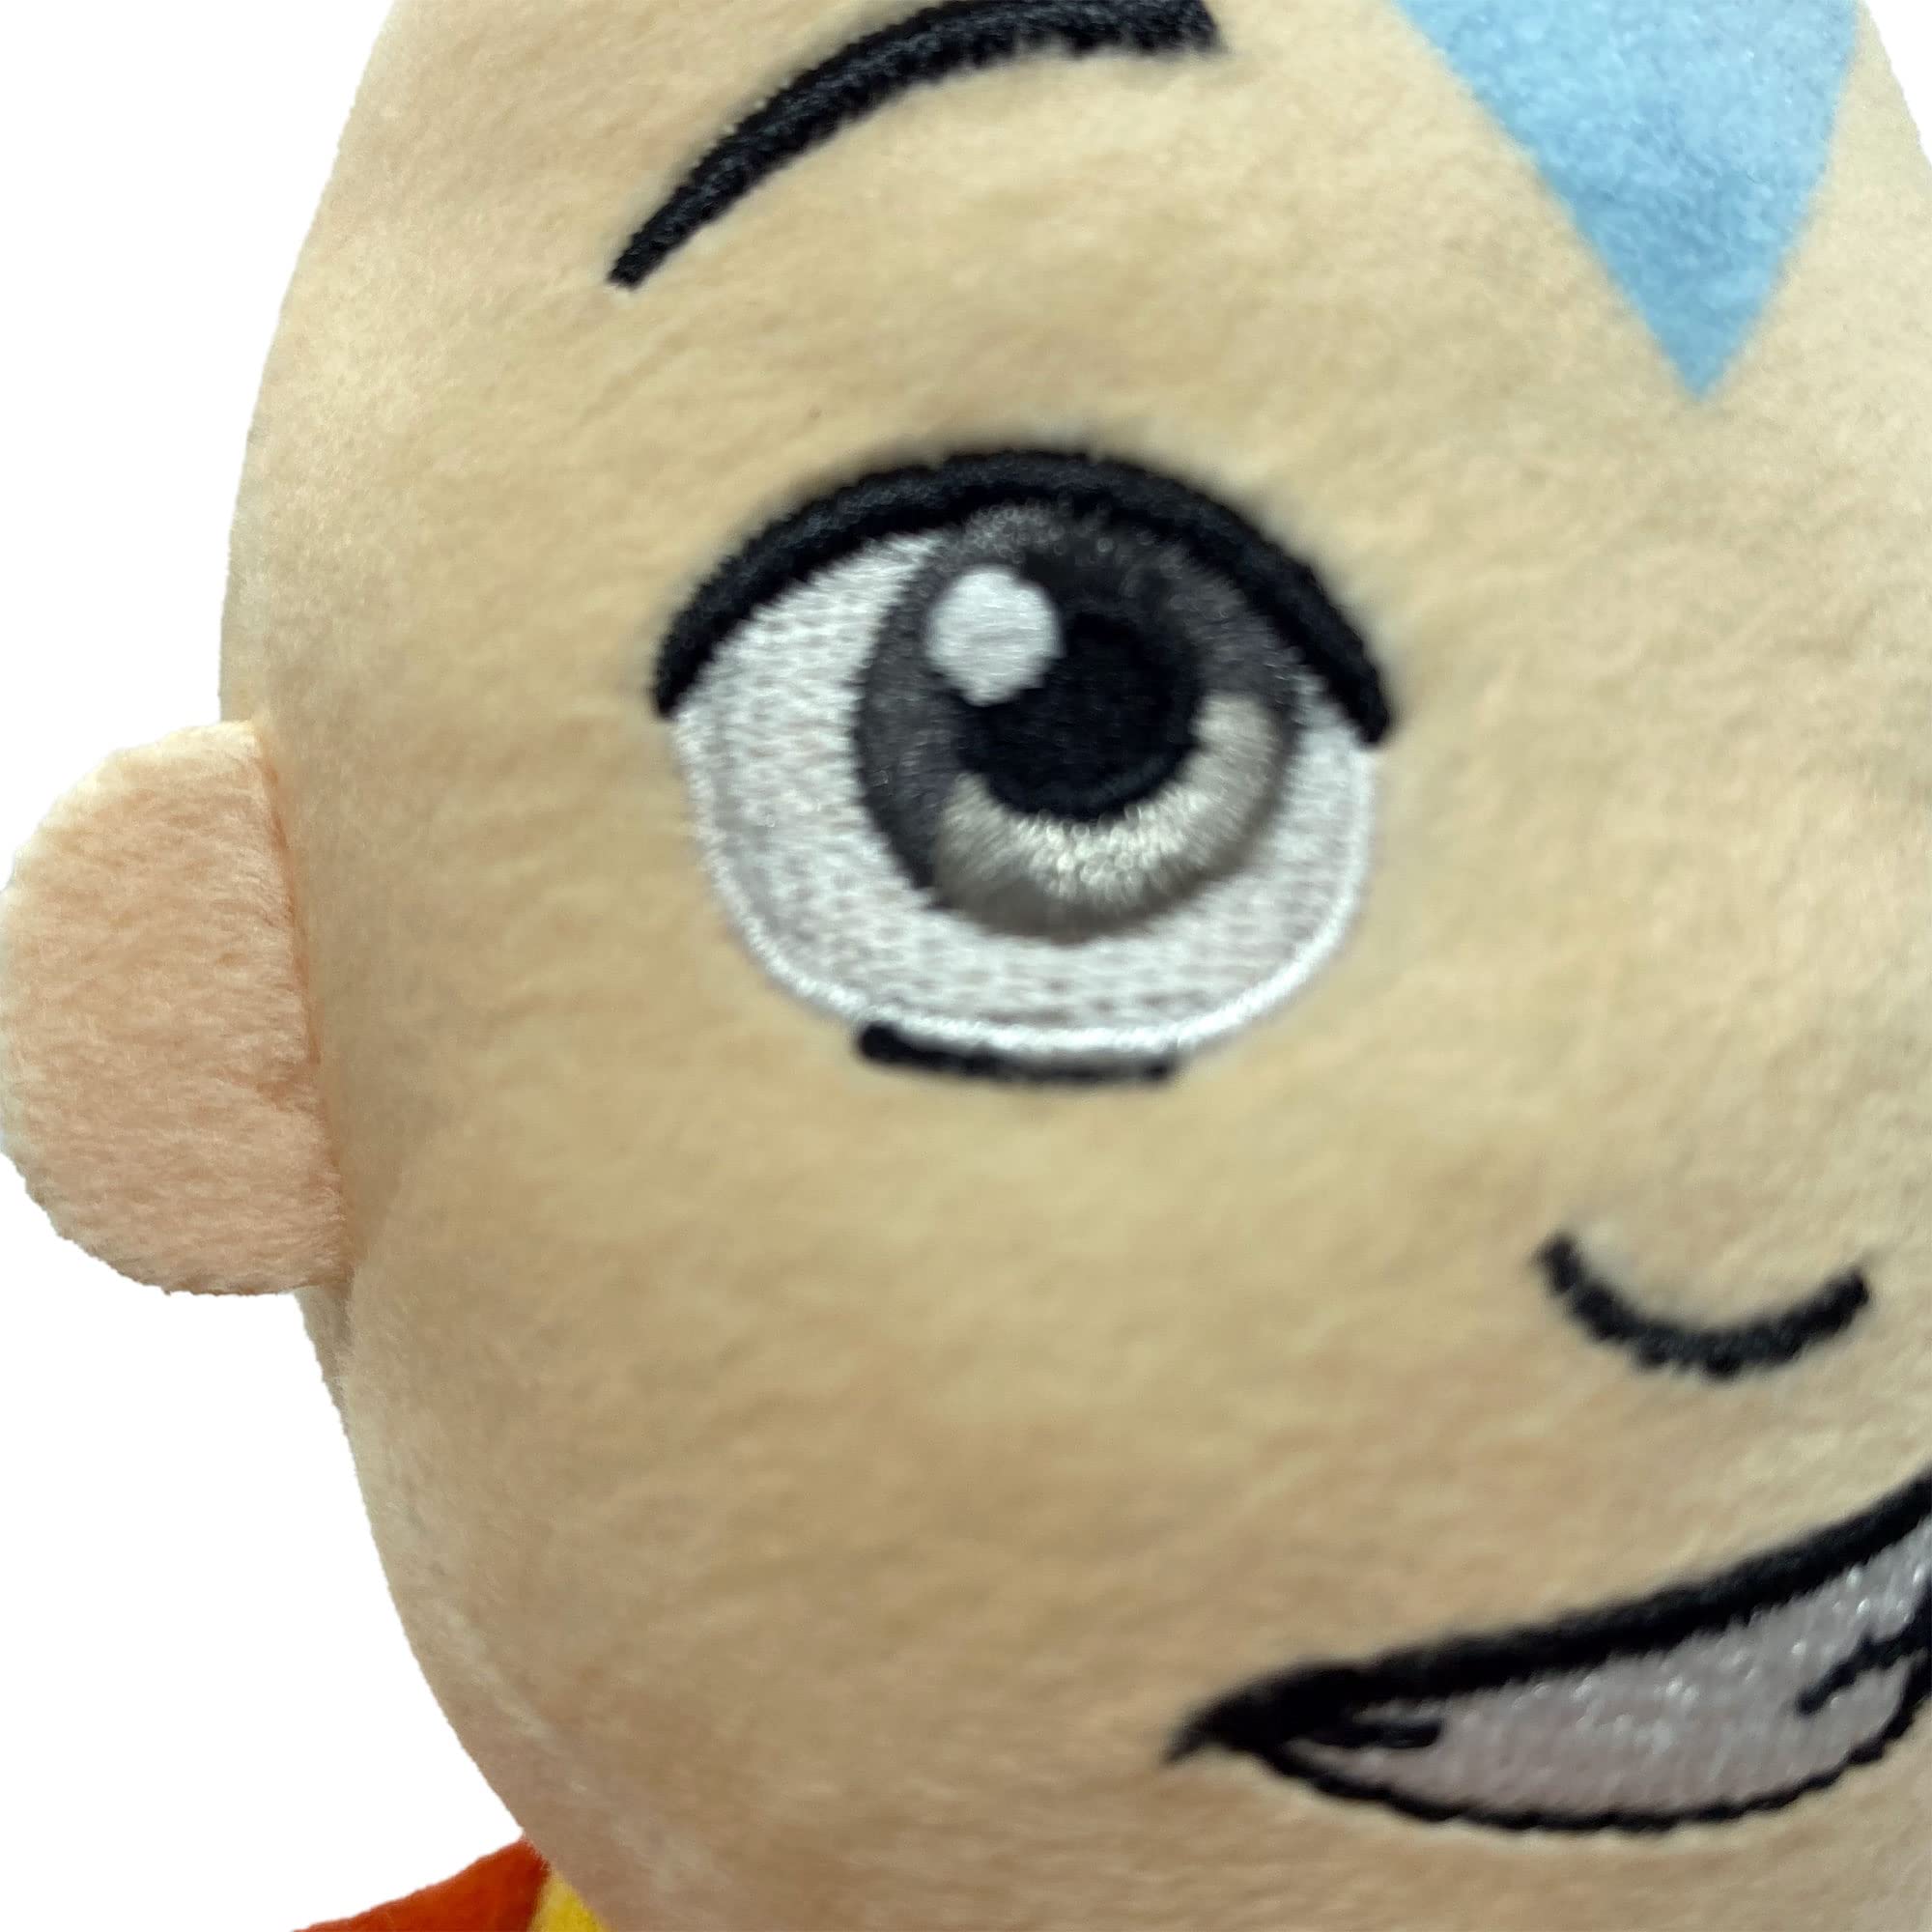 JINX Avatar: The Last Airbender Aang Small Plush Toy, 7.5-in Stuffed Figure from Nickelodeon TV Series for Fans of All Ages